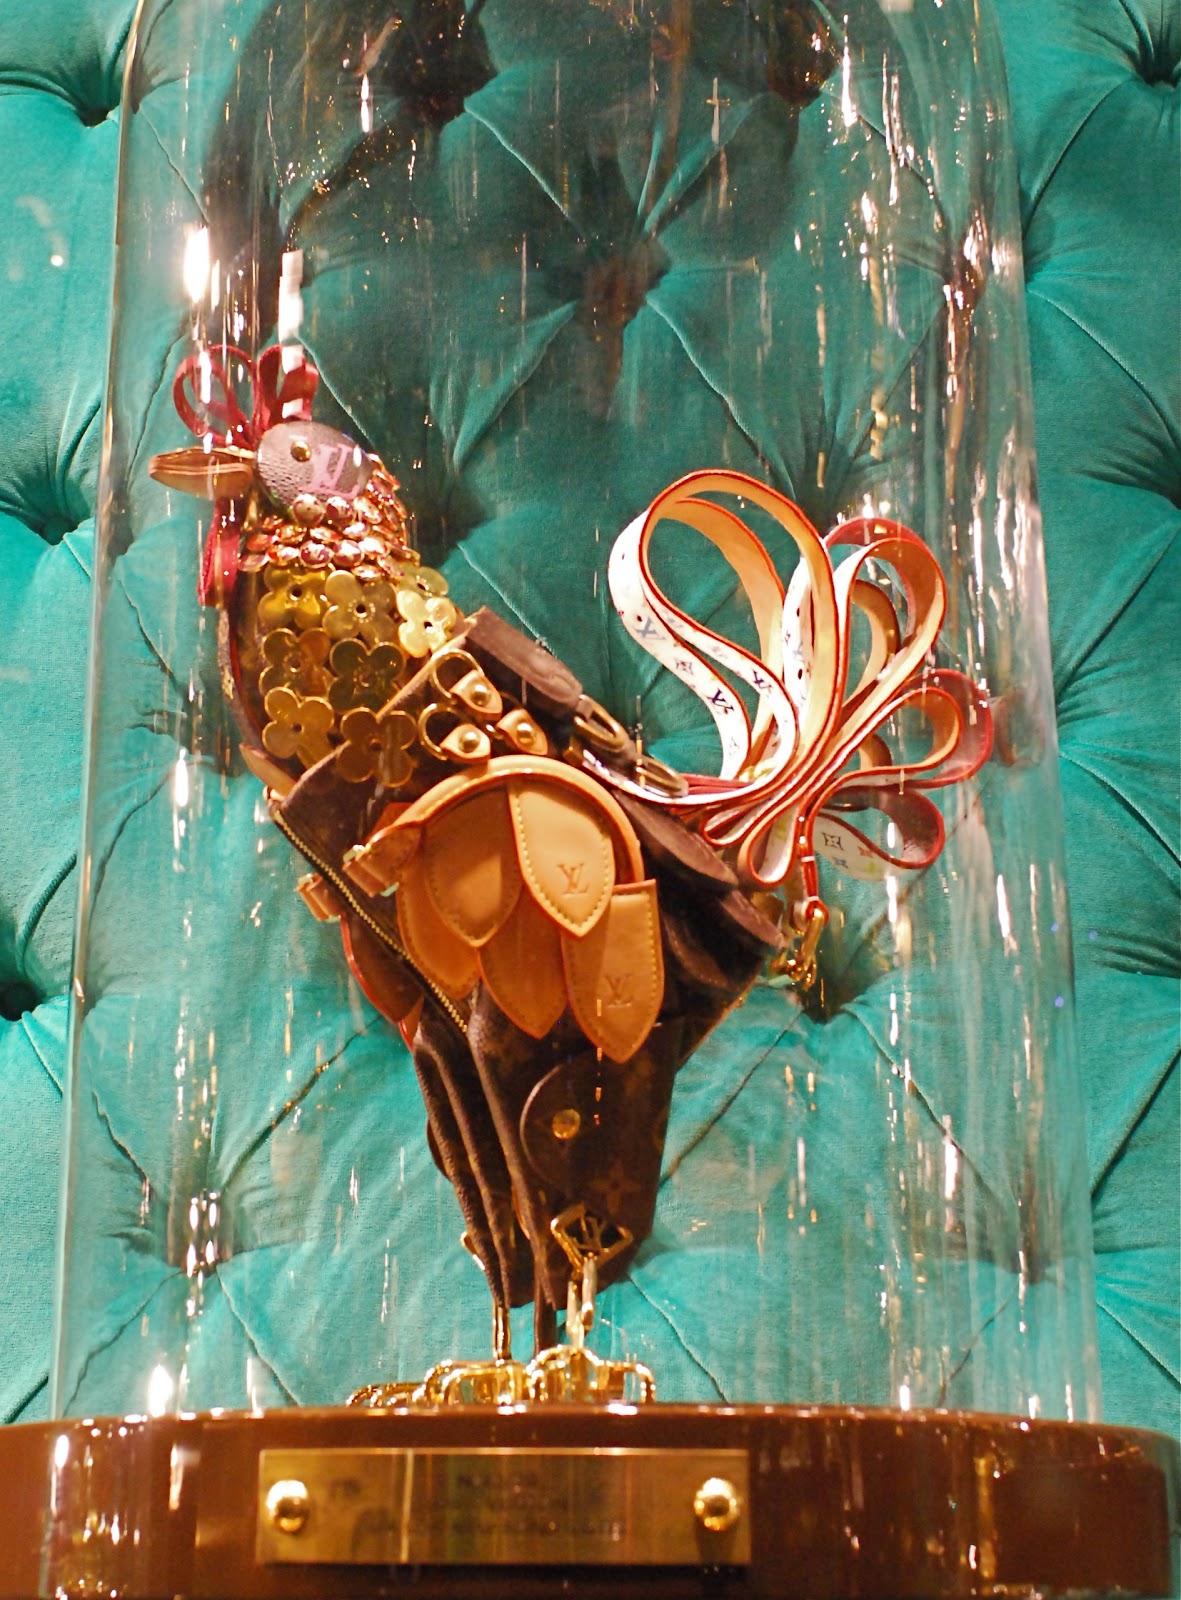 NYC ♥ NYC: Louis Vuitton Fifth Avenue Flagship Store Window Display - All Creatures Great And Small